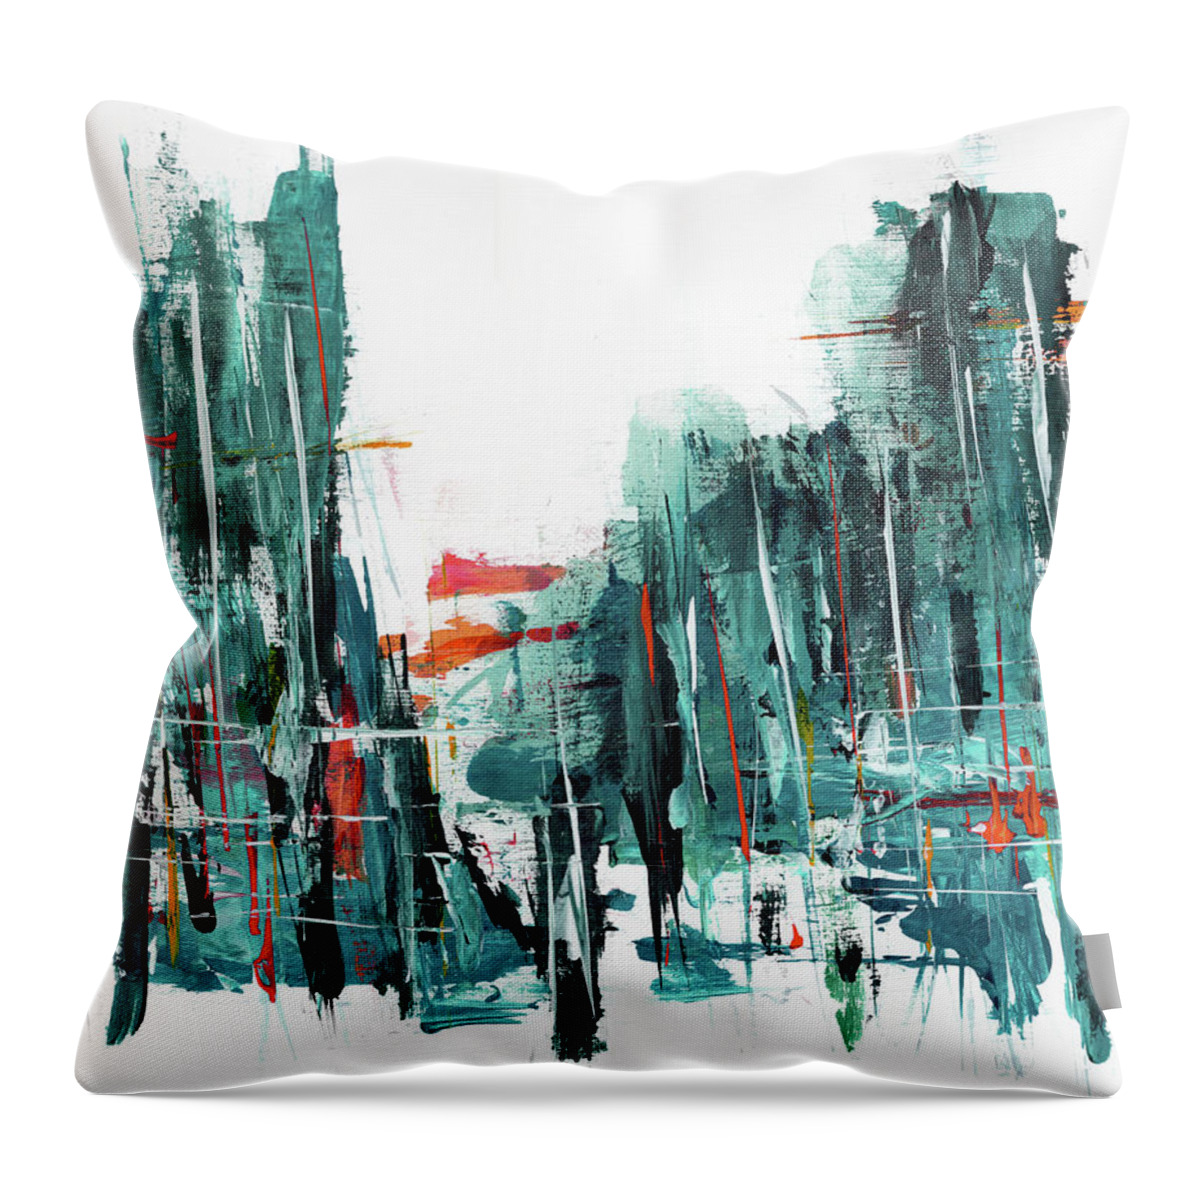 Turquoise Throw Pillow featuring the painting City Hussle by Diane Maley